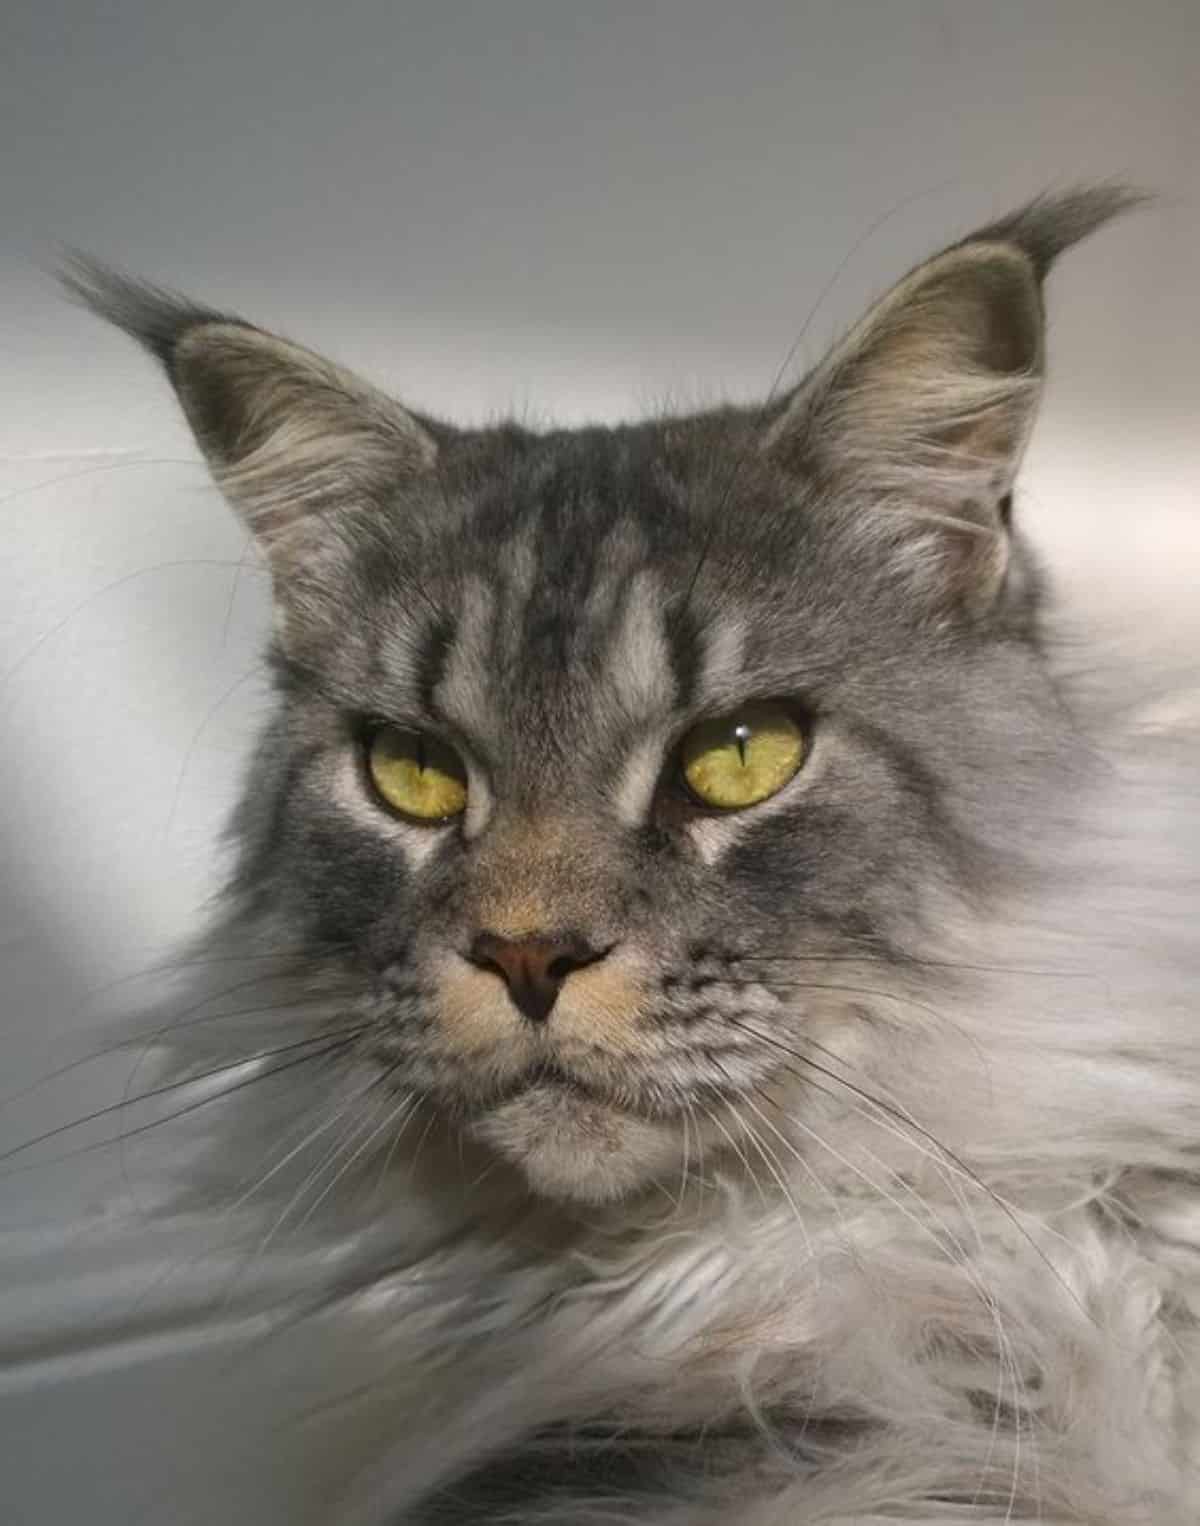 A close-up of a gray maine coon face with yellow eyes.